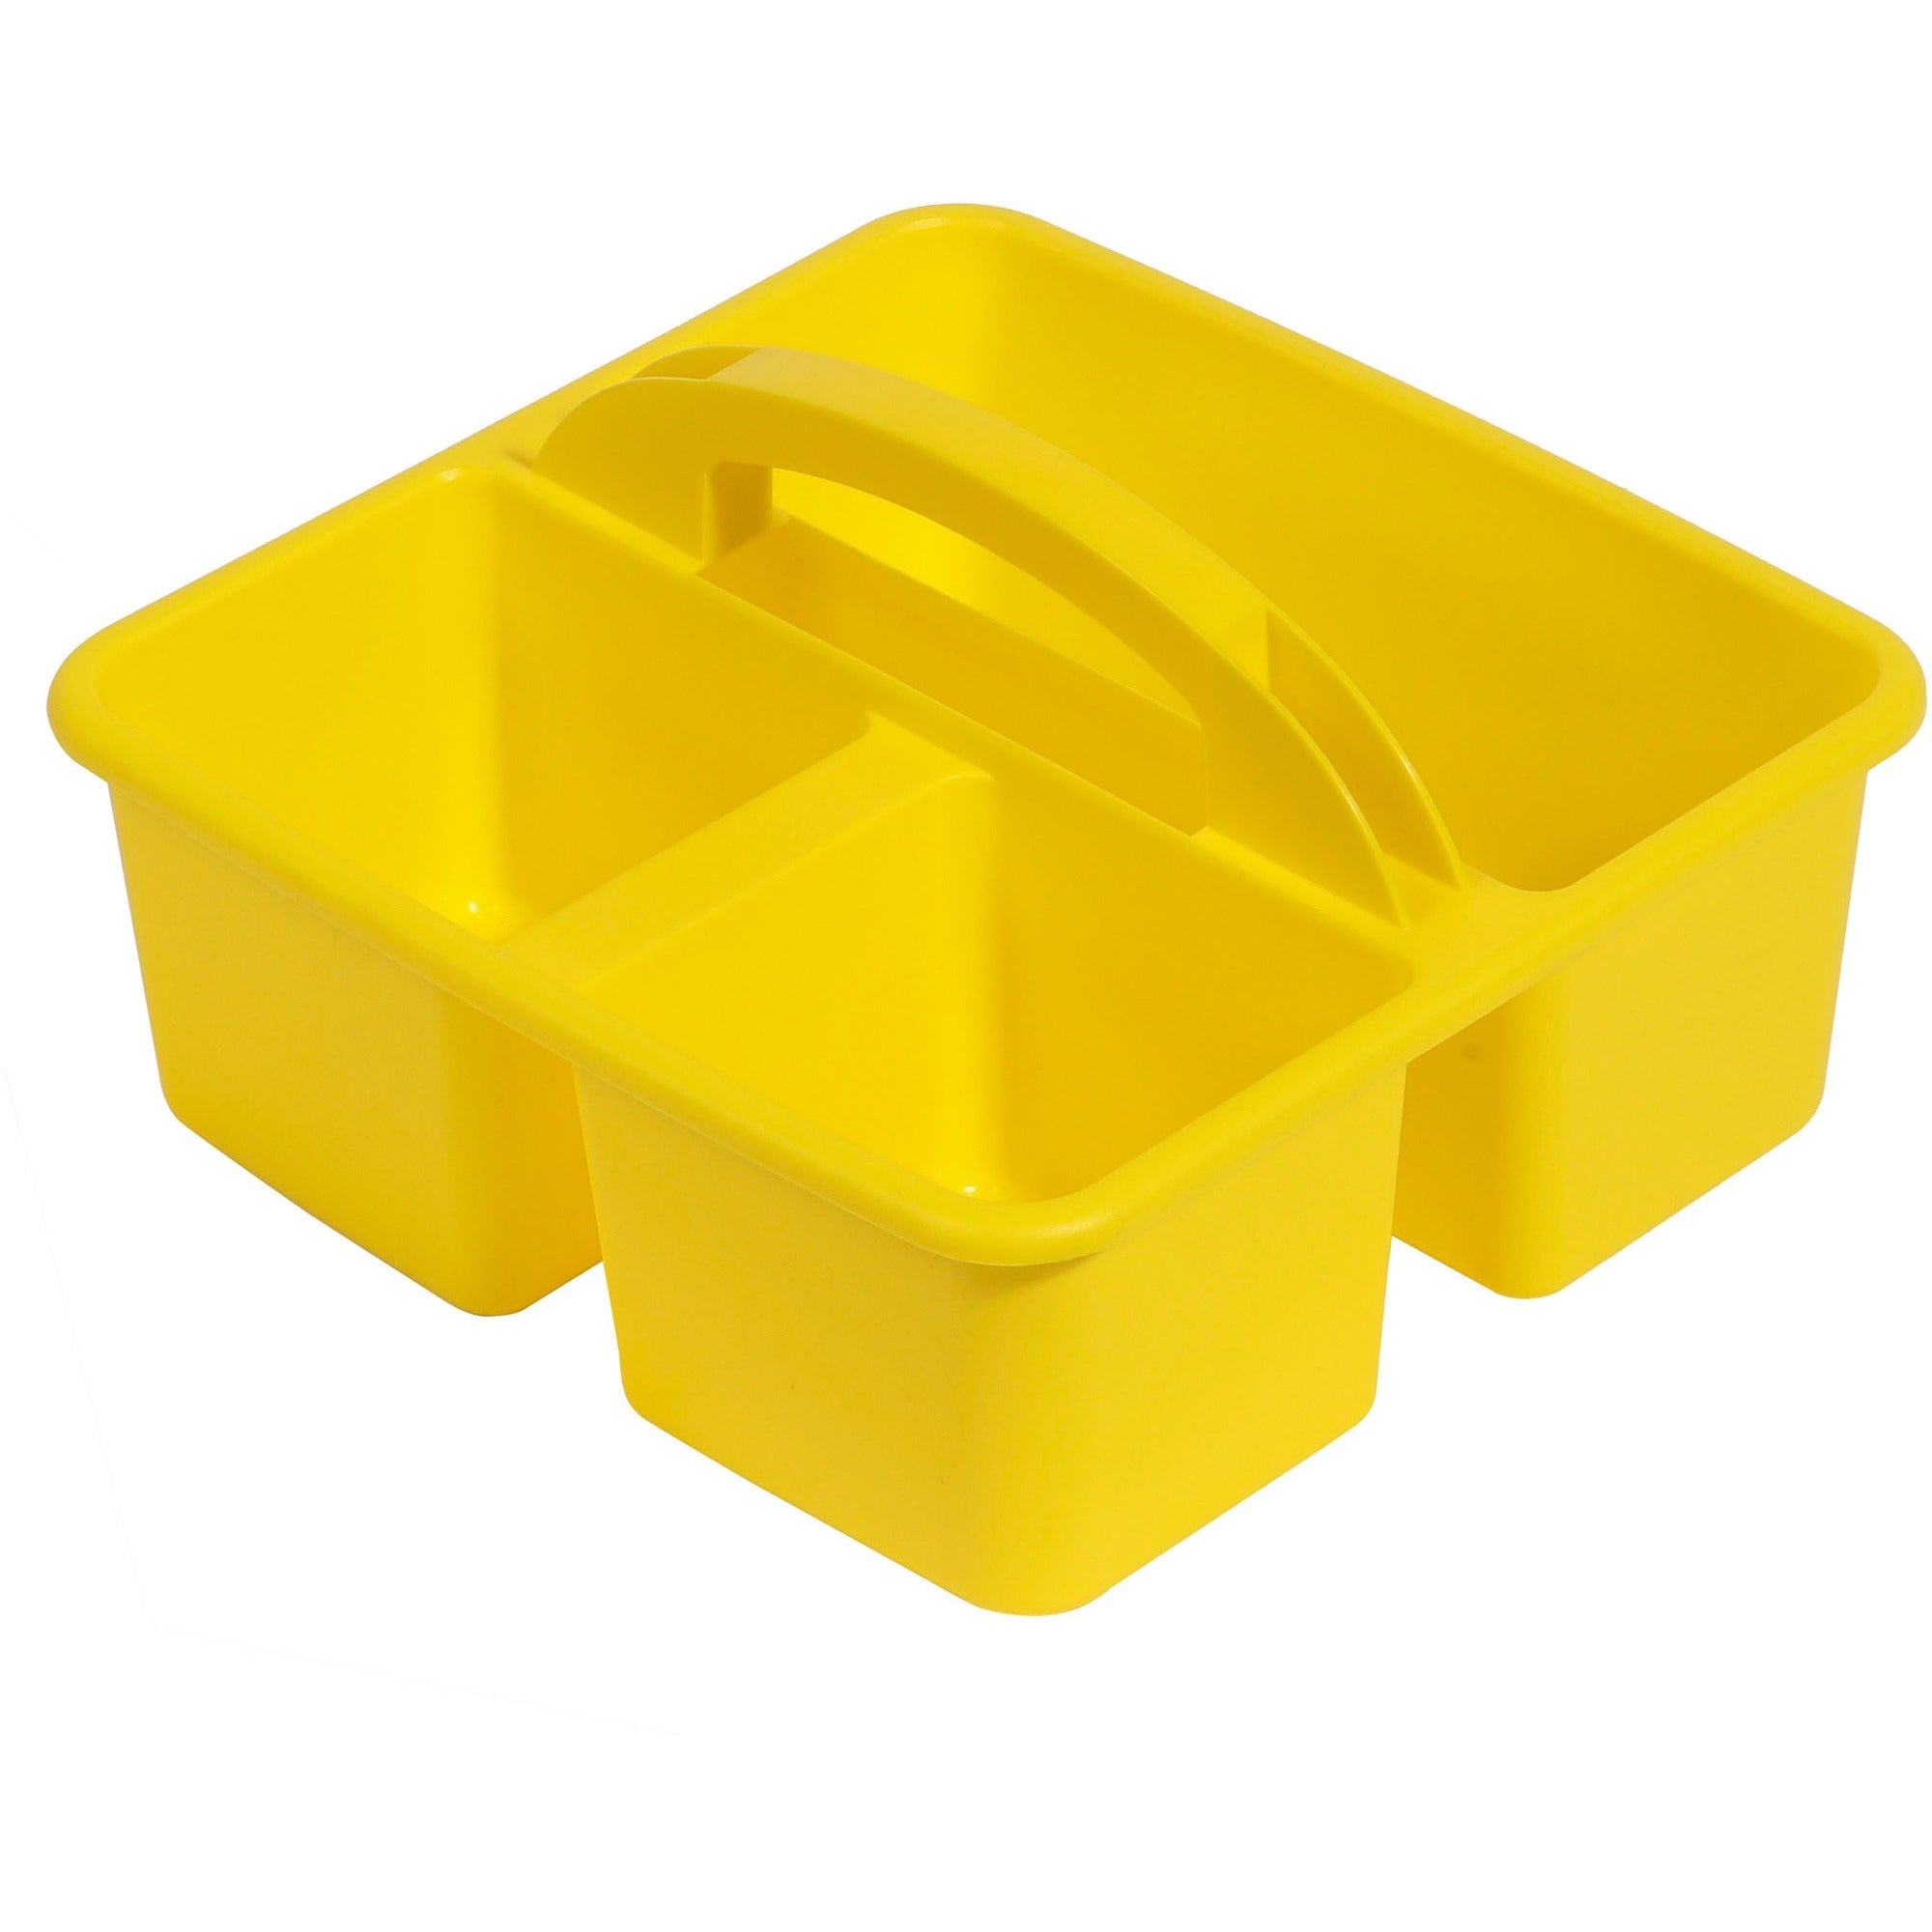 deflecto-antimicrobial-kids-storage-caddy-3-compartments-53-height-x-94-width-x-93-depth-antimicrobial-lightweight-portable-mold-resistant-mildew-resistant-durable-washable-stackable-yellow-polypropylene-1-each_def39505yel - 1